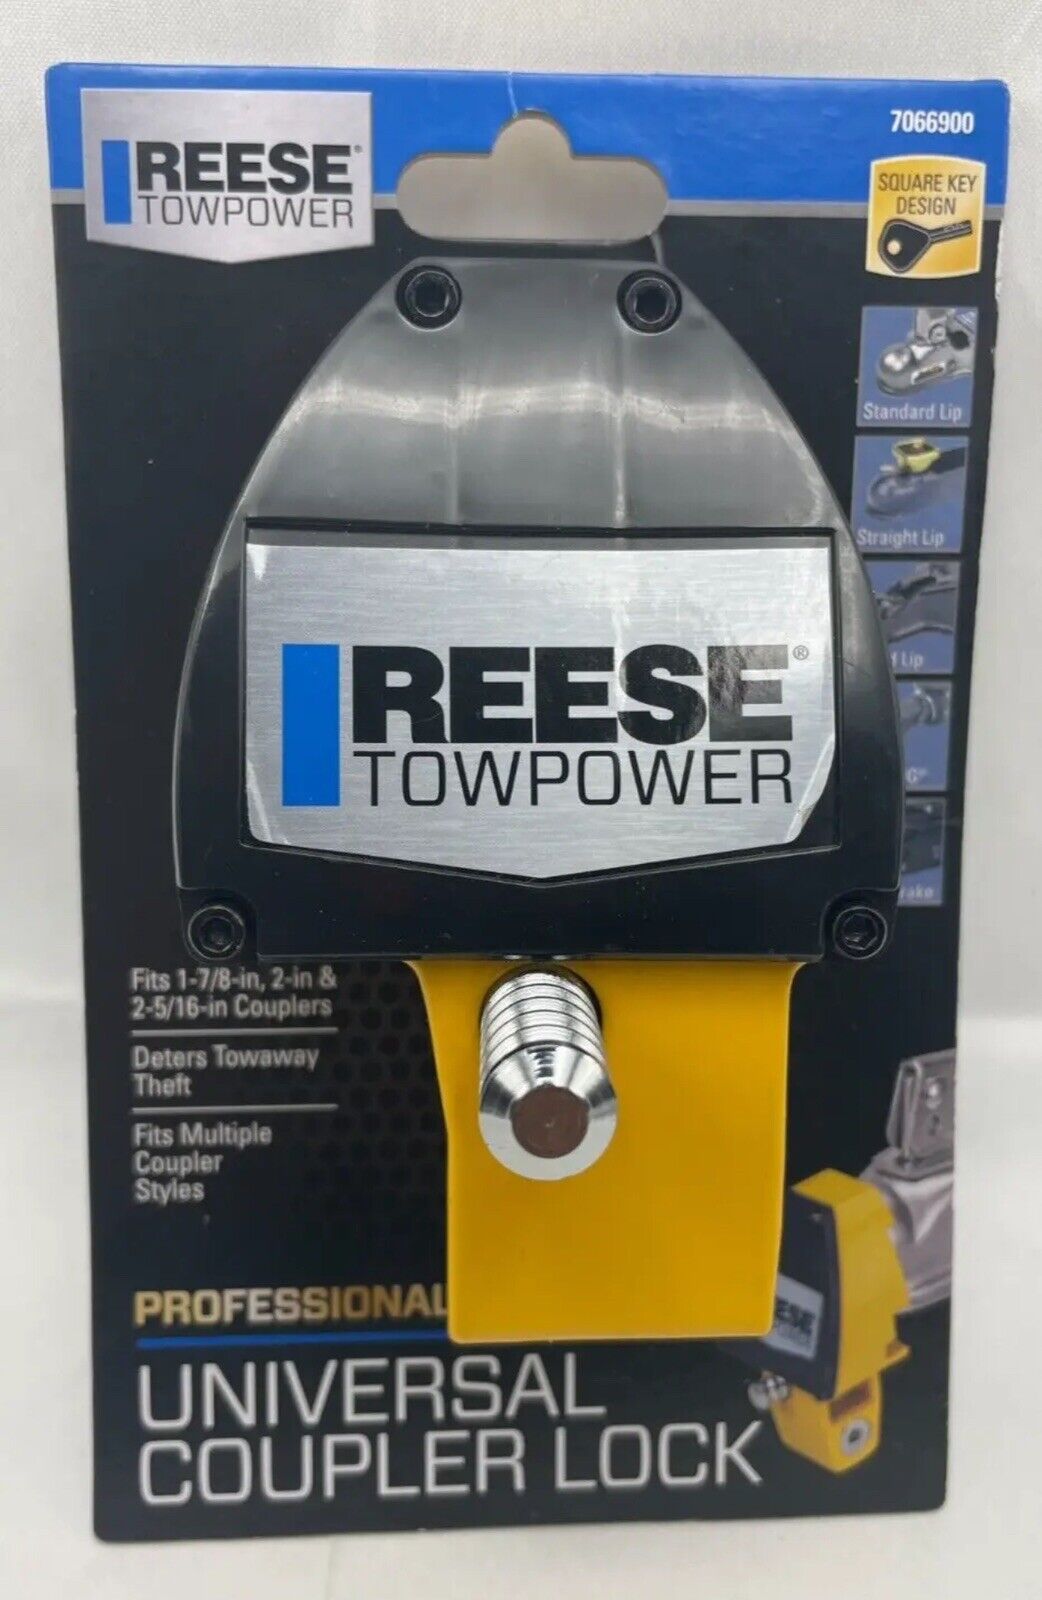 Reese Towpower 7066900 Pro Universal Coupler Lock Fits 1-7/8\